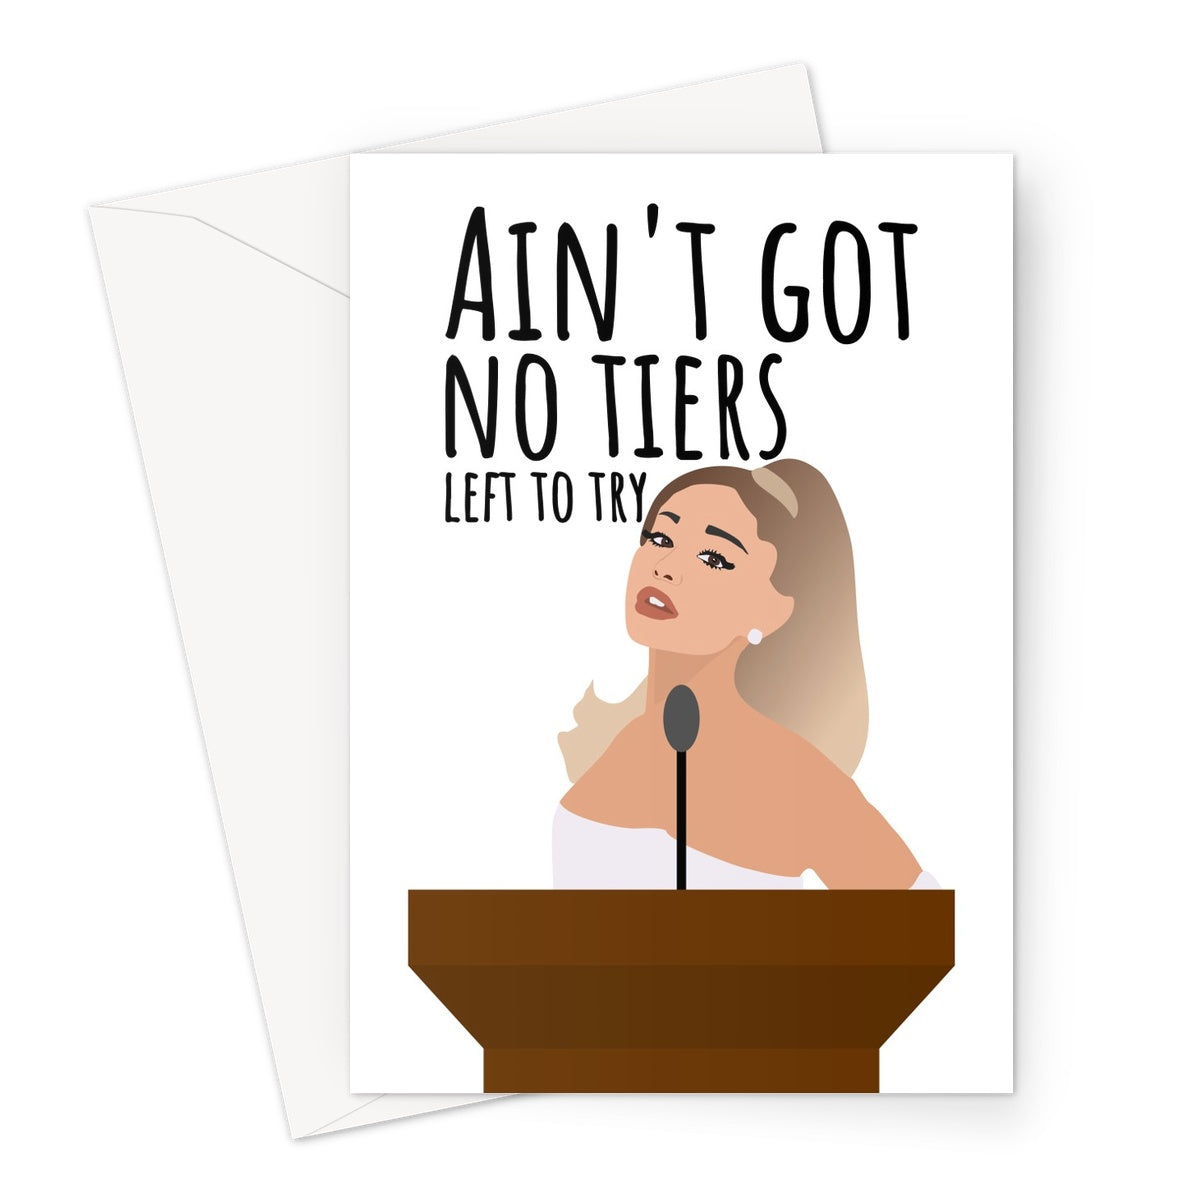 No Tiers Left To Try Ariana Grande Tears left to cry Song Funny Meme Boris Johnson Briefing Lockdown Chris Witty Pandemic Corona Virus Christmas Birthday Fan Greeting Card